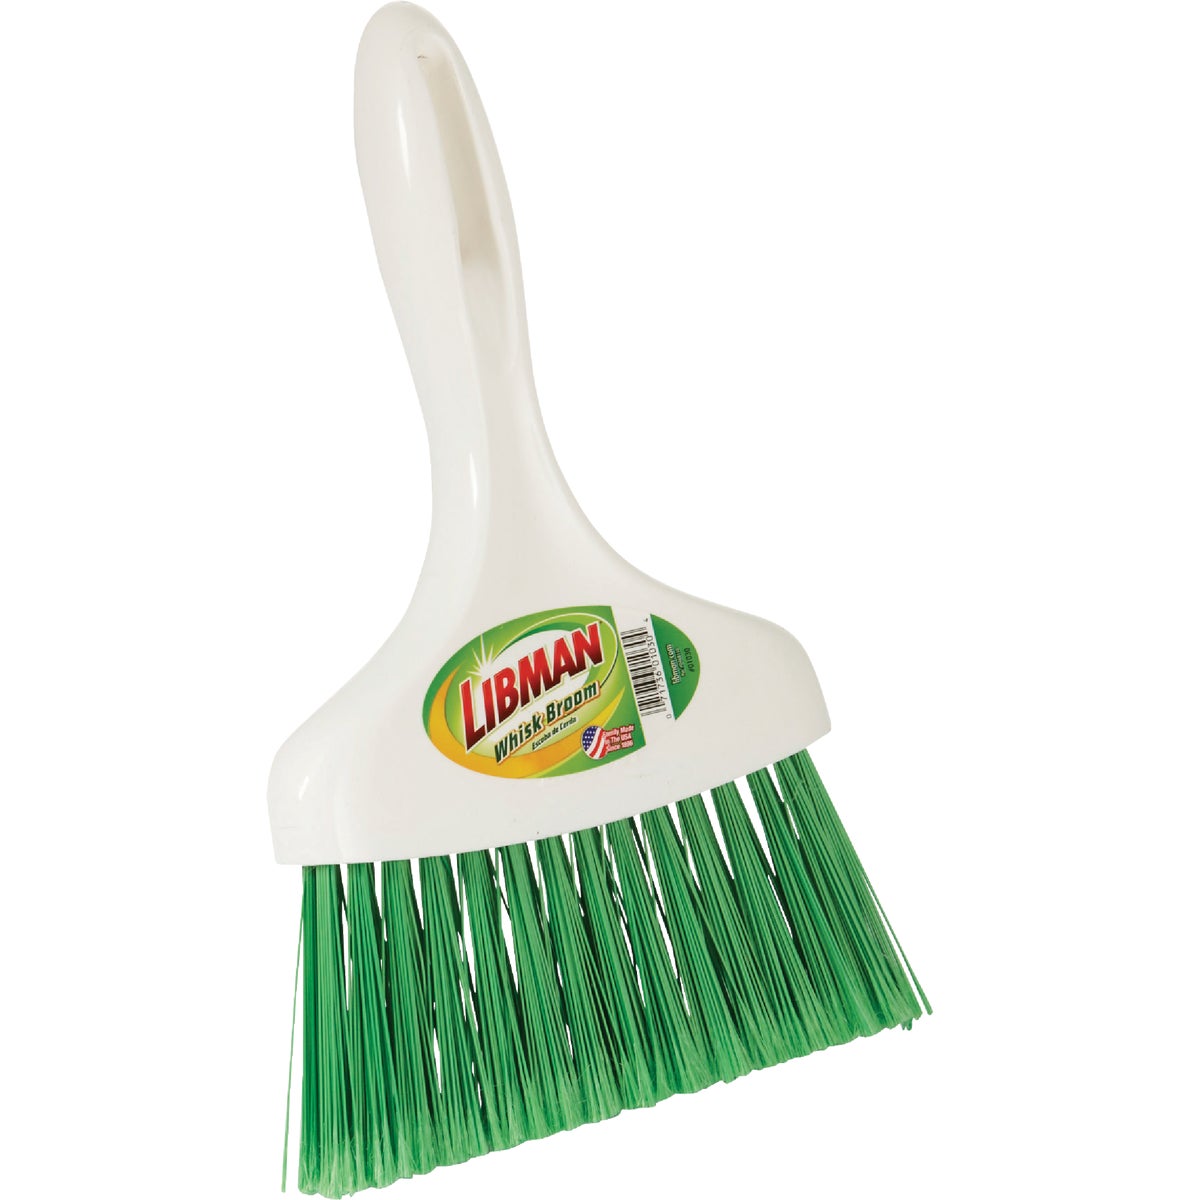 Item 635588, Whisk broom has 42 tufts of flexible, split tip polymer fibers that pick up